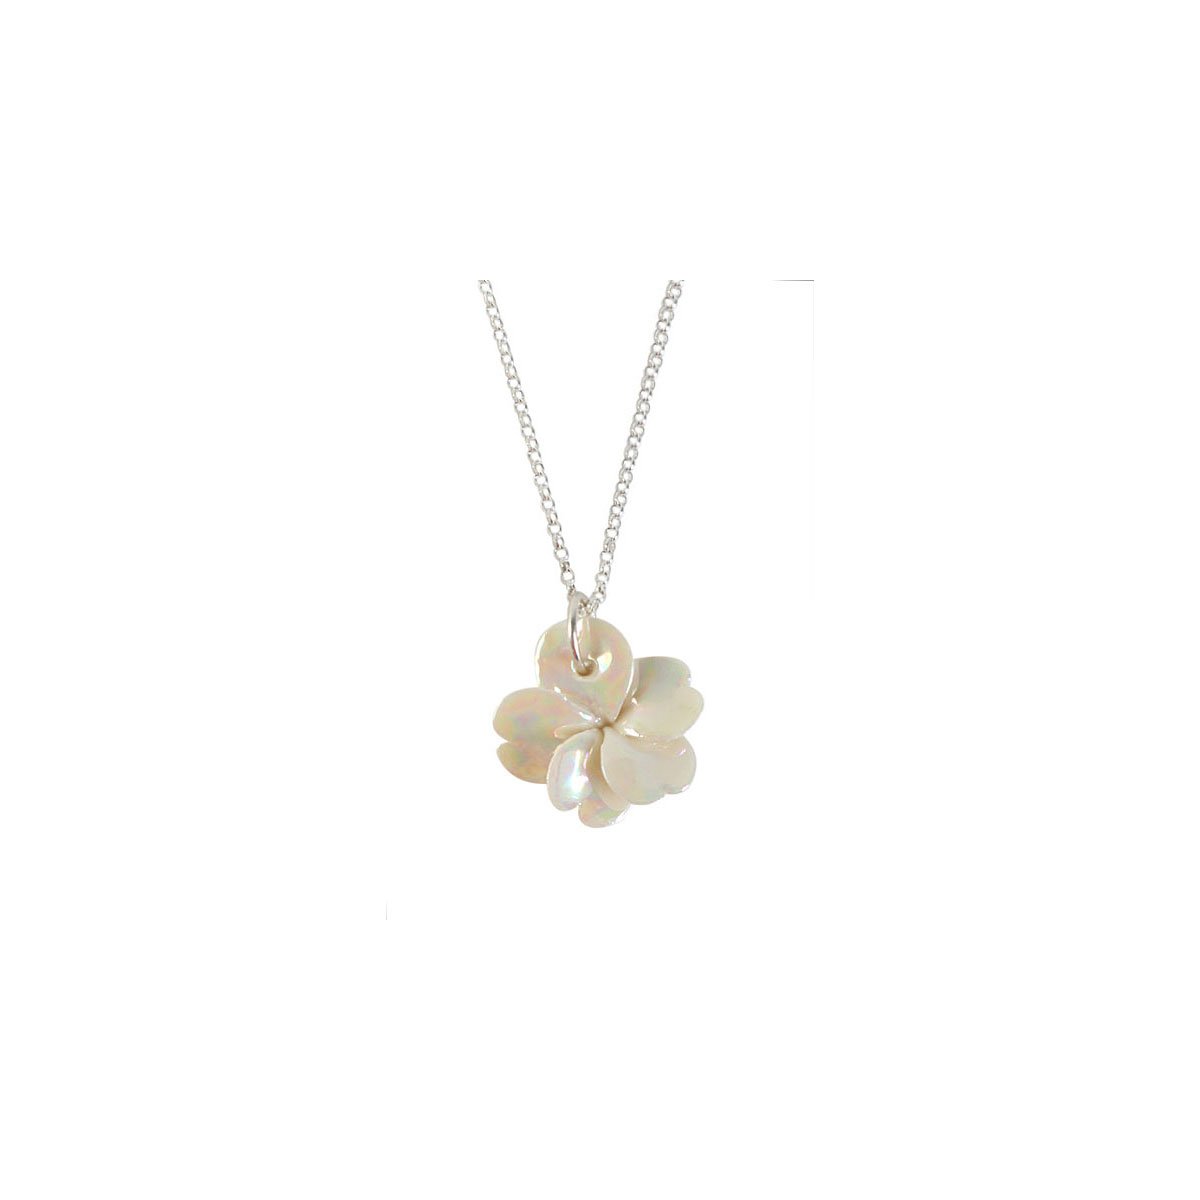 Belleek Porcelain Jewelry Plumeria Necklace Mother of Pearl